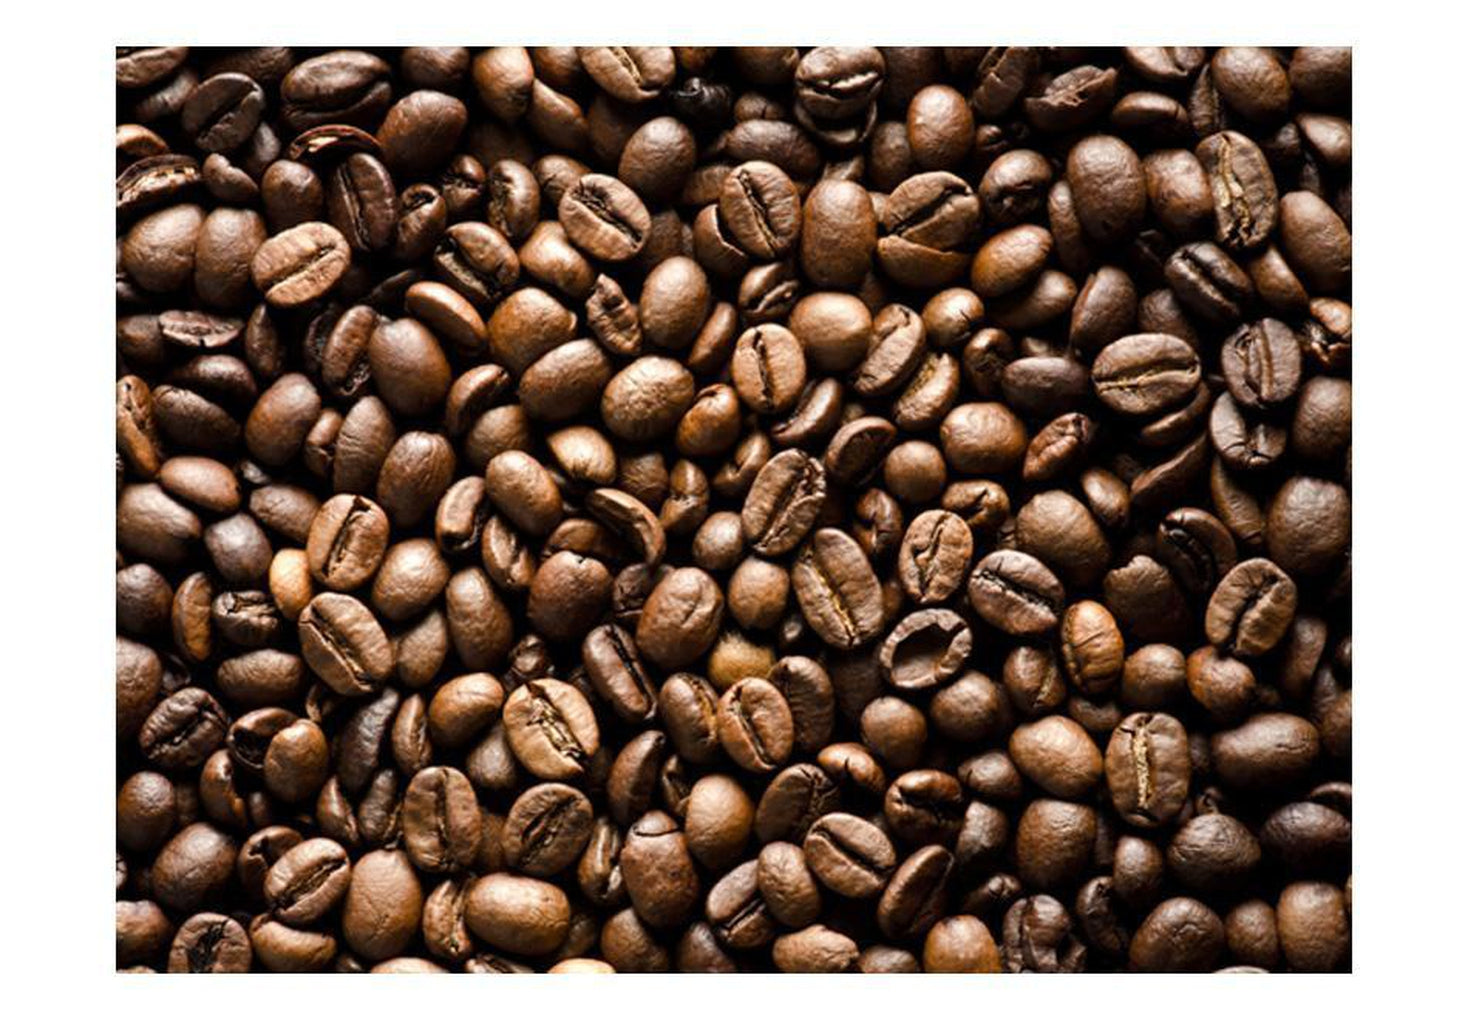 Wall mural - Roasted coffee beans-TipTopHomeDecor